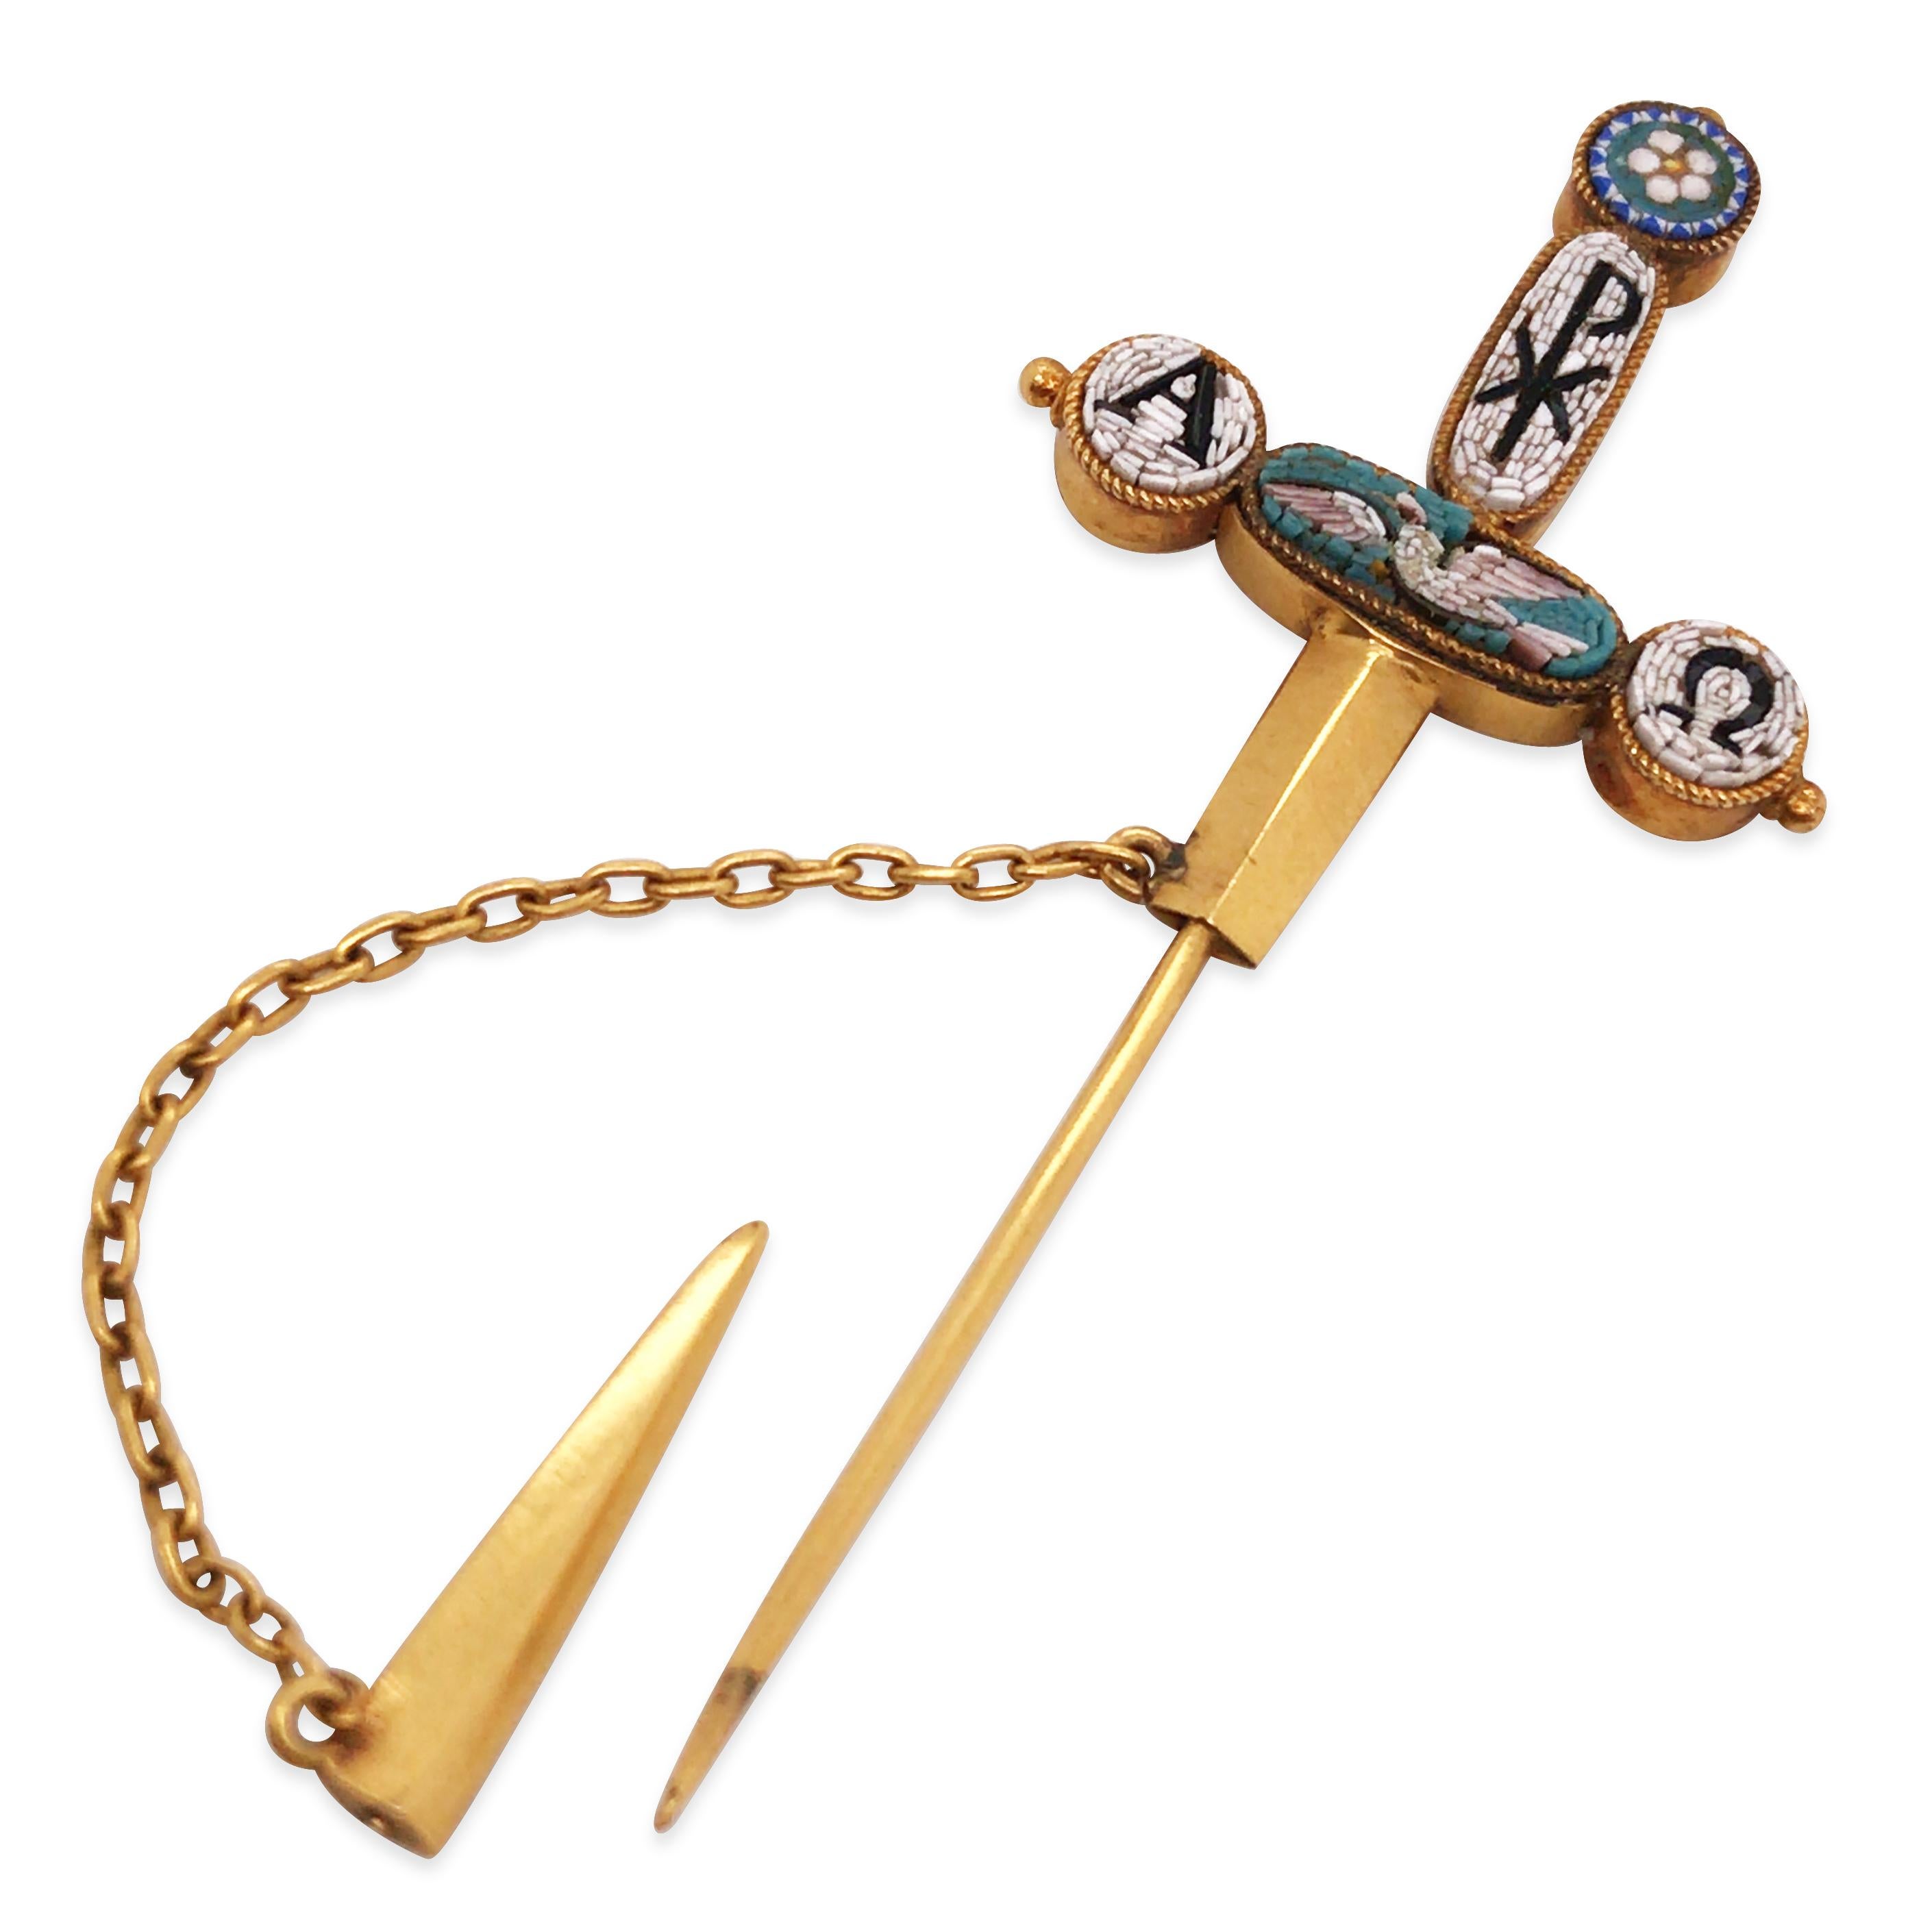 Designed as a sword with Chi Rho, Alpha and Omega, and a dove symbol.

Weight: 4.0 grams
Measurement: 7.6cm in length